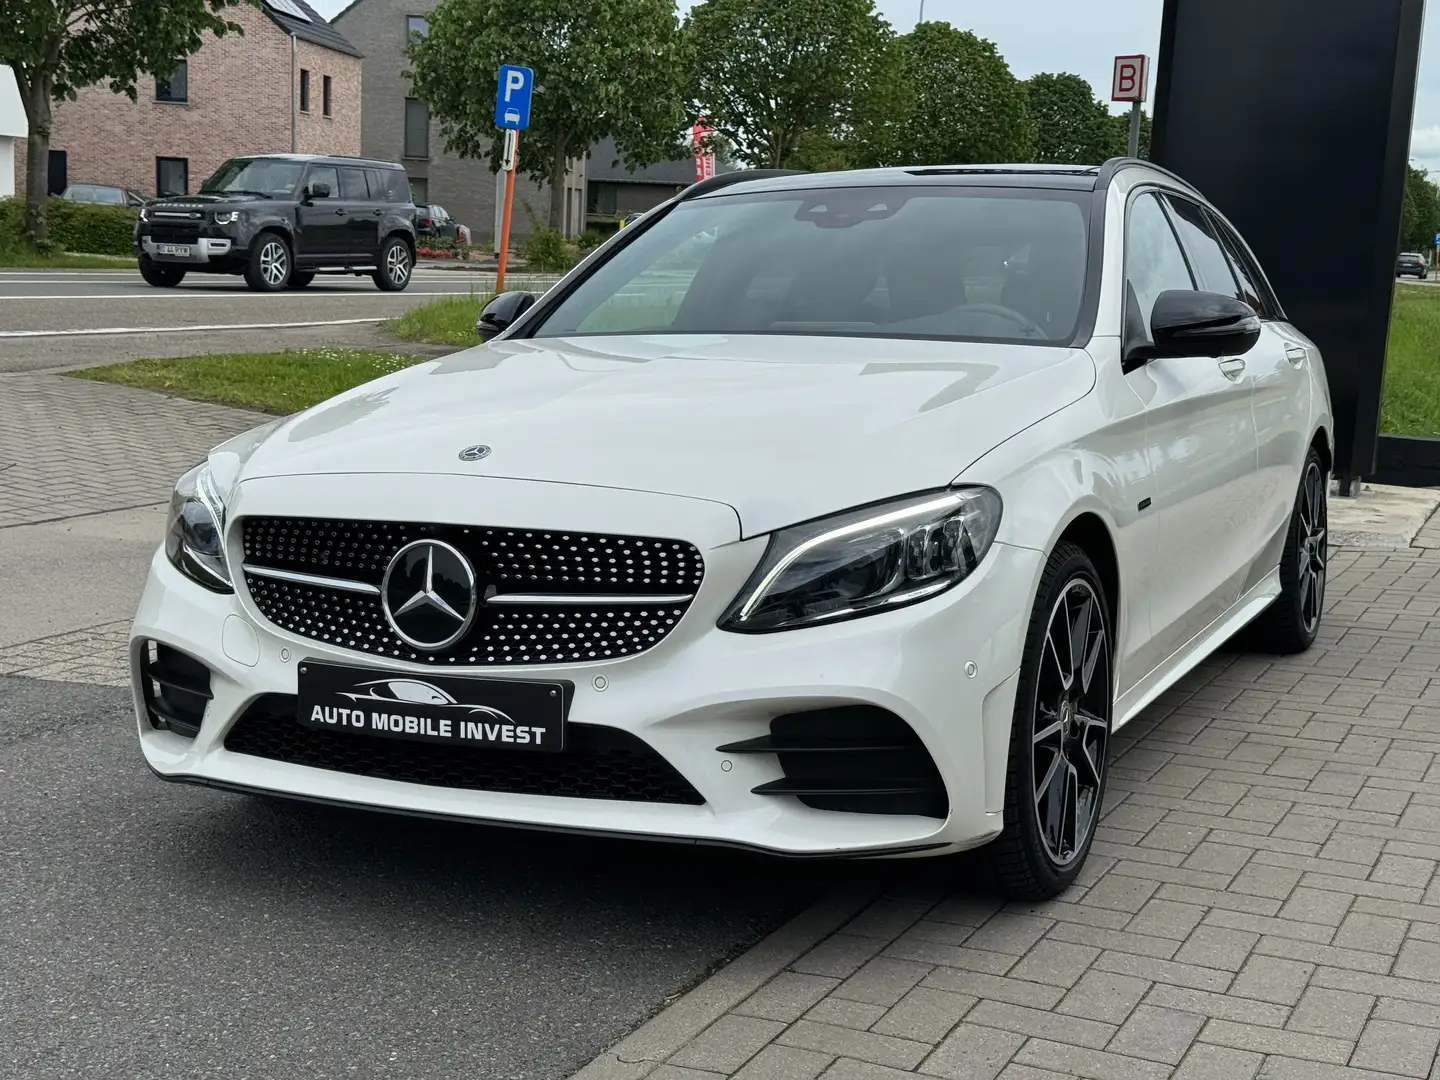 Mercedes-Benz C 300 e PHEV PANO ROOF BURMEISTER SOLD! White - 2